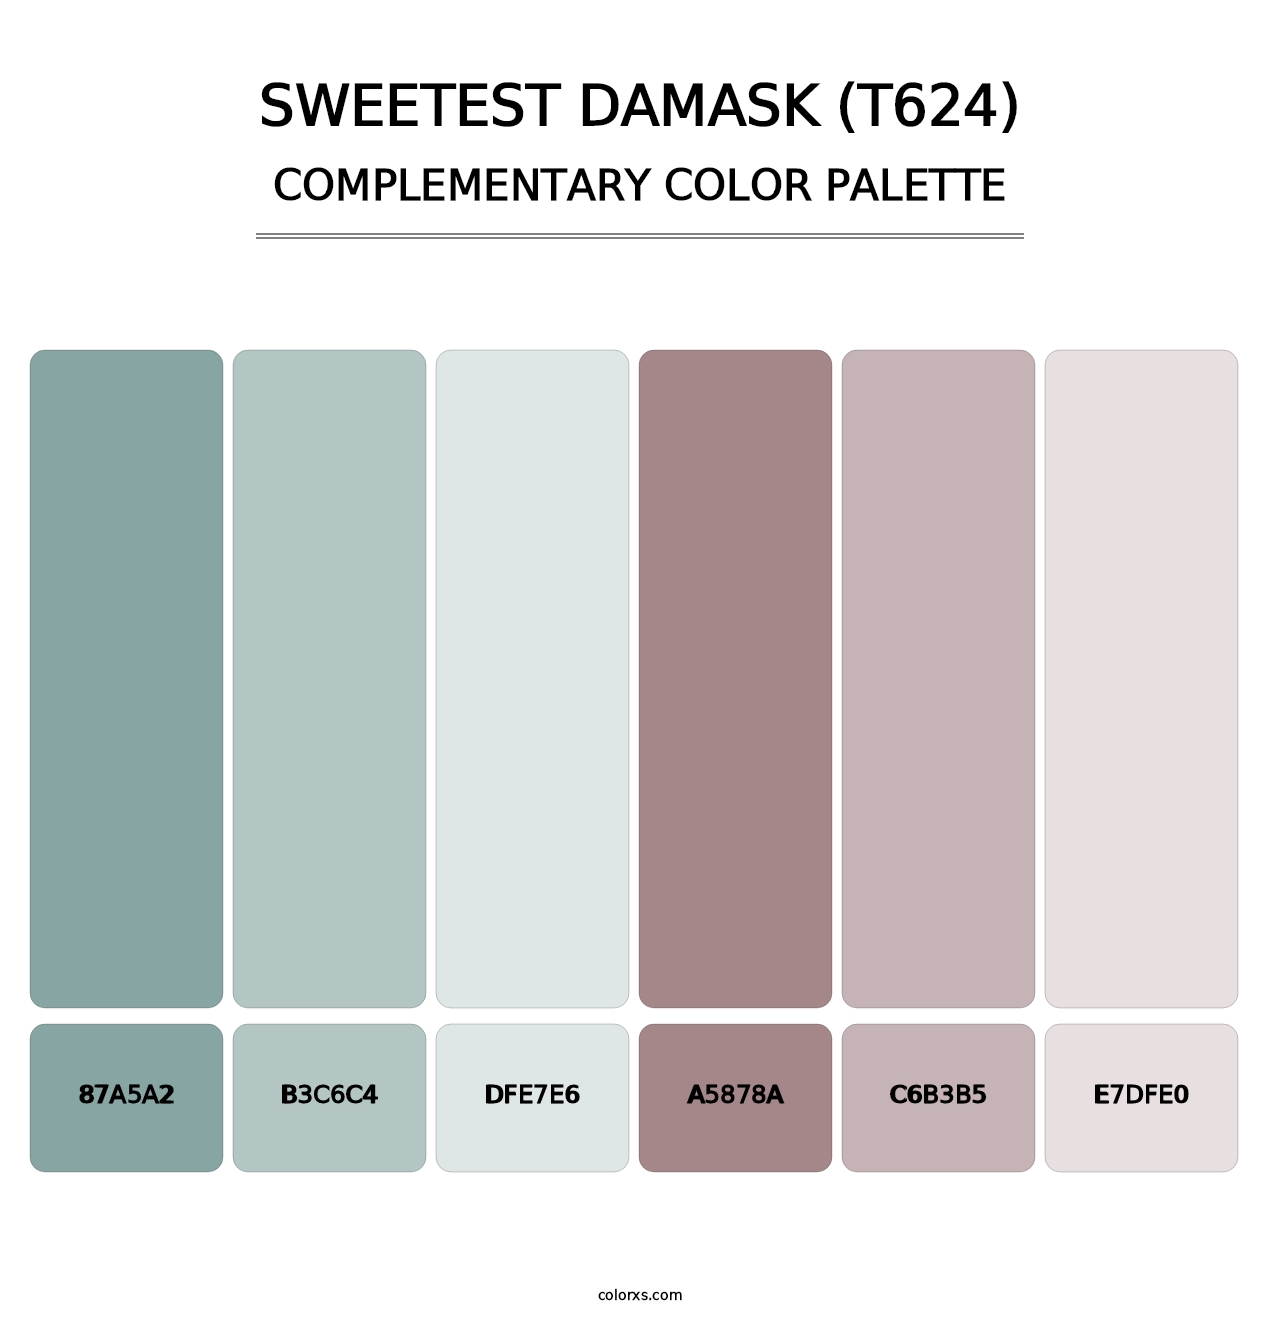 Sweetest Damask (T624) - Complementary Color Palette